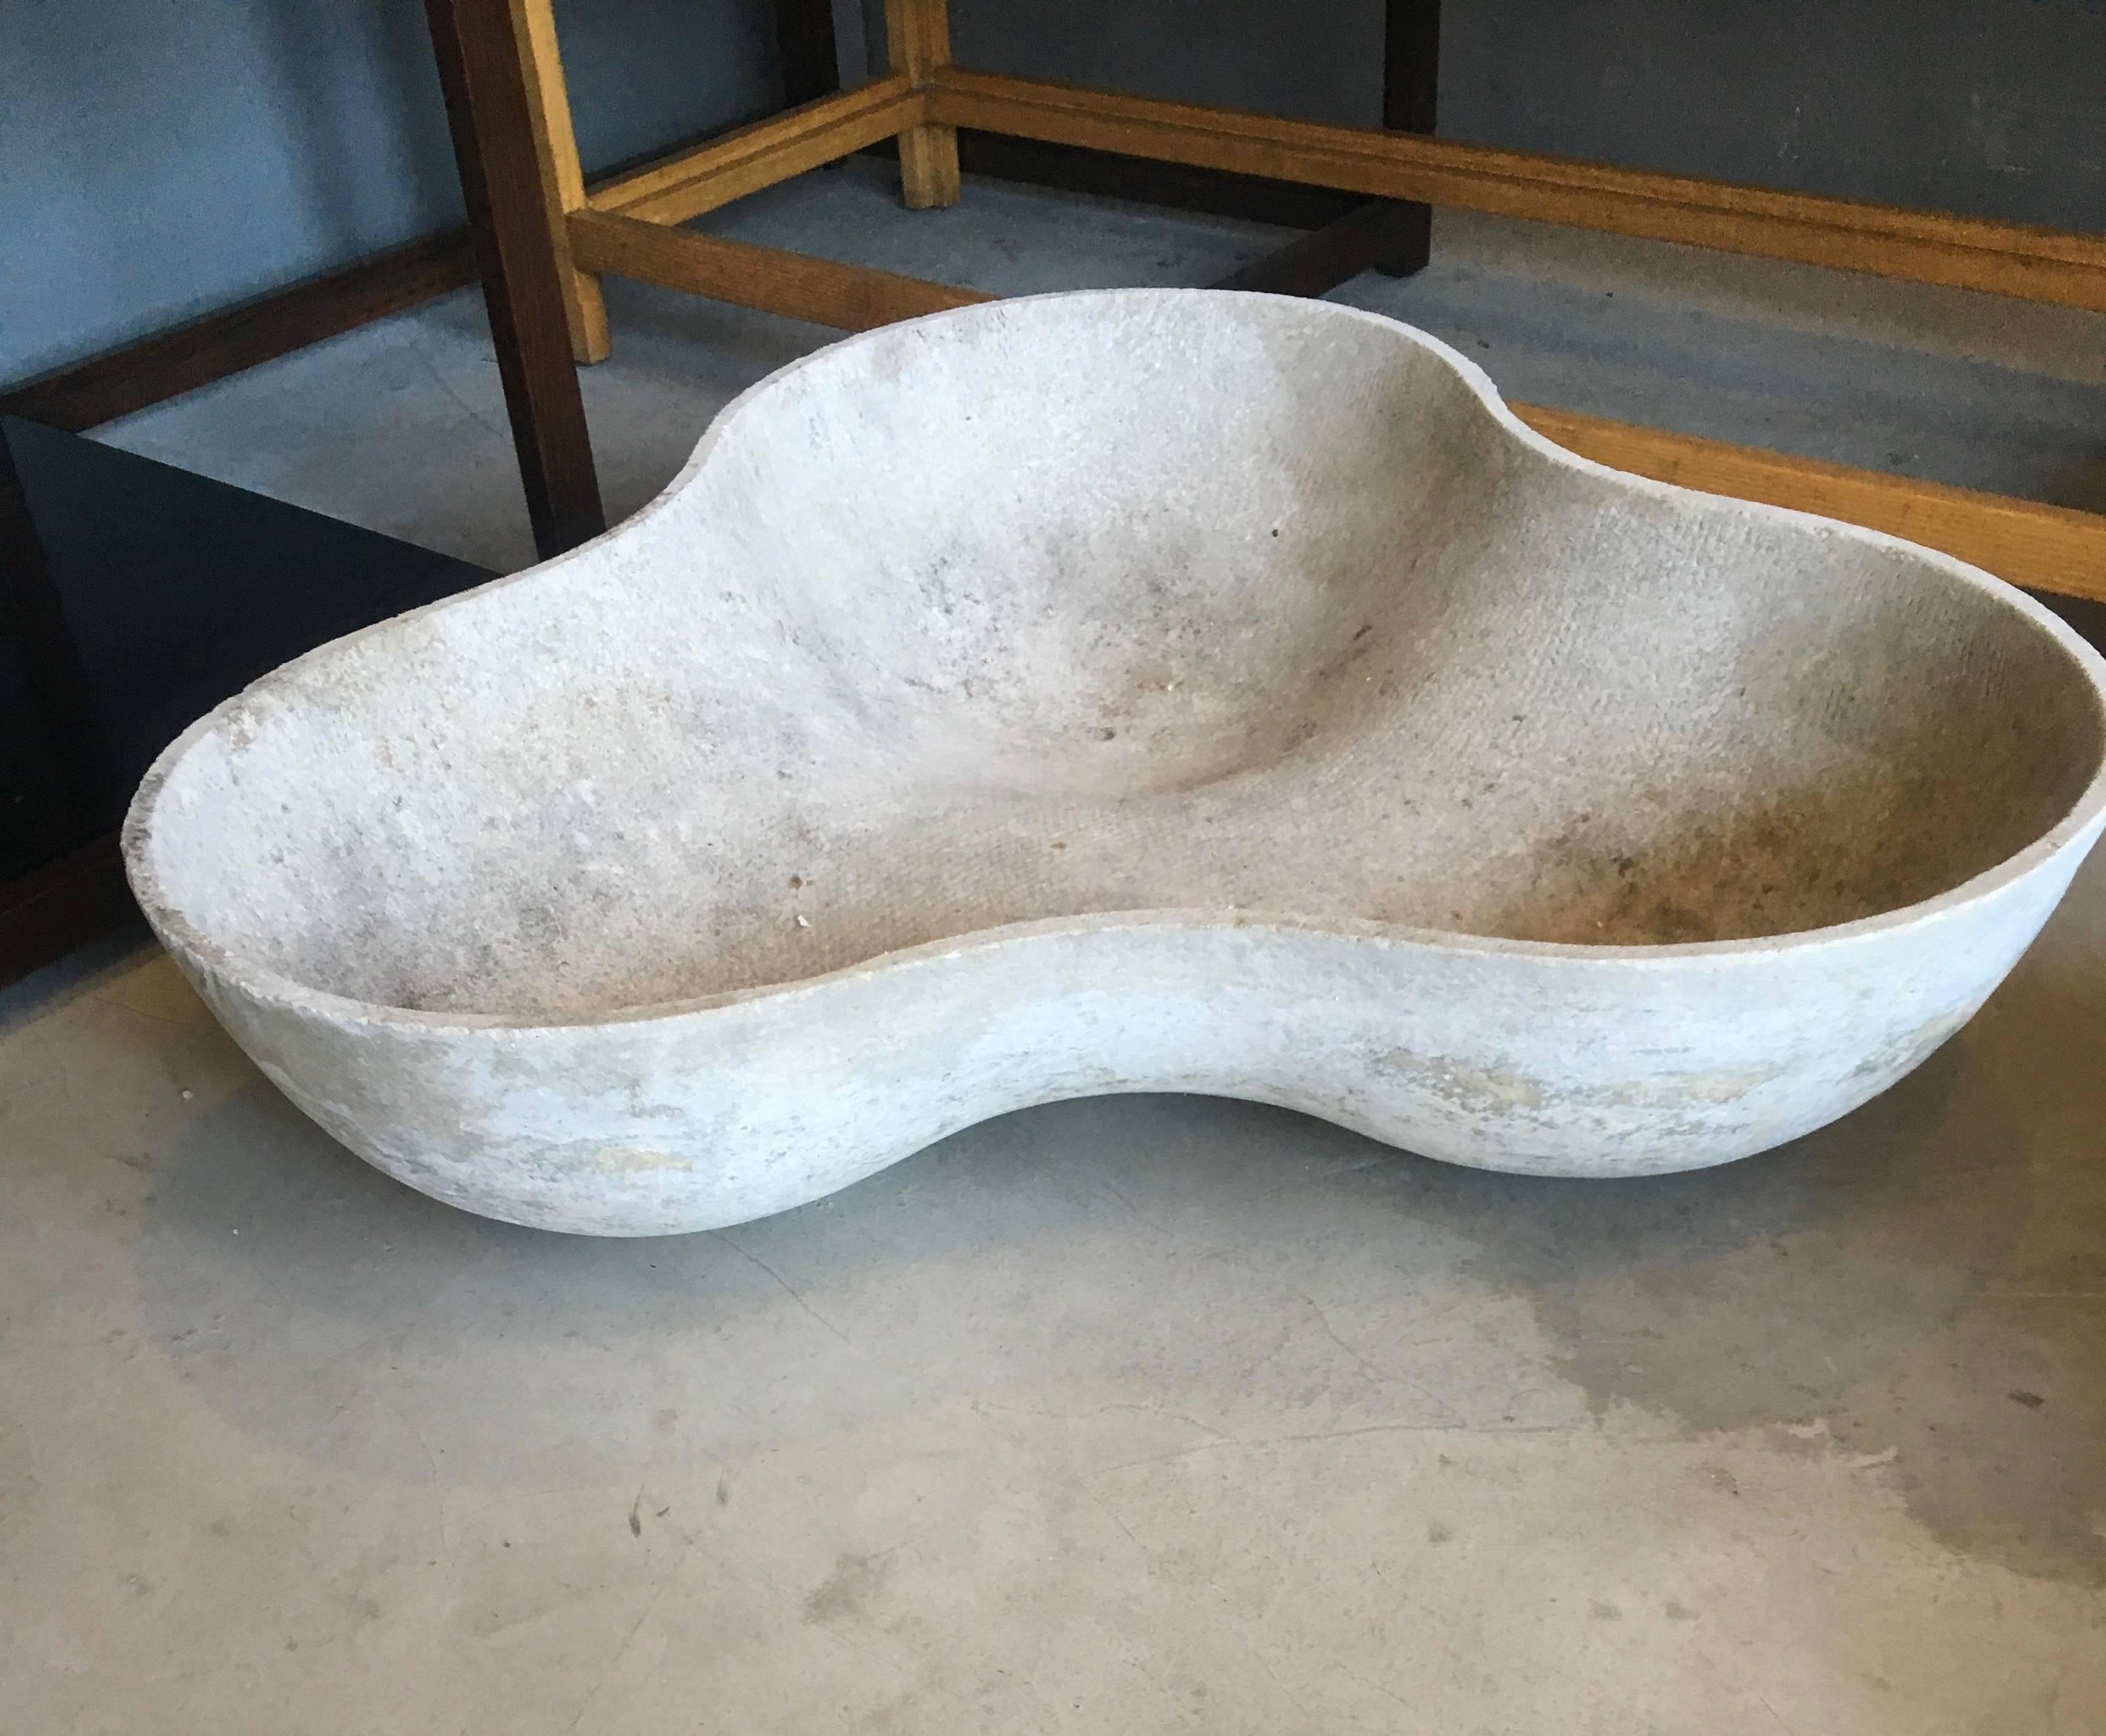 Very rare Willy Guhl amoeba shaped planter made of cement. Great sculptural object. Excellent vintage condition. Only one still available.

 